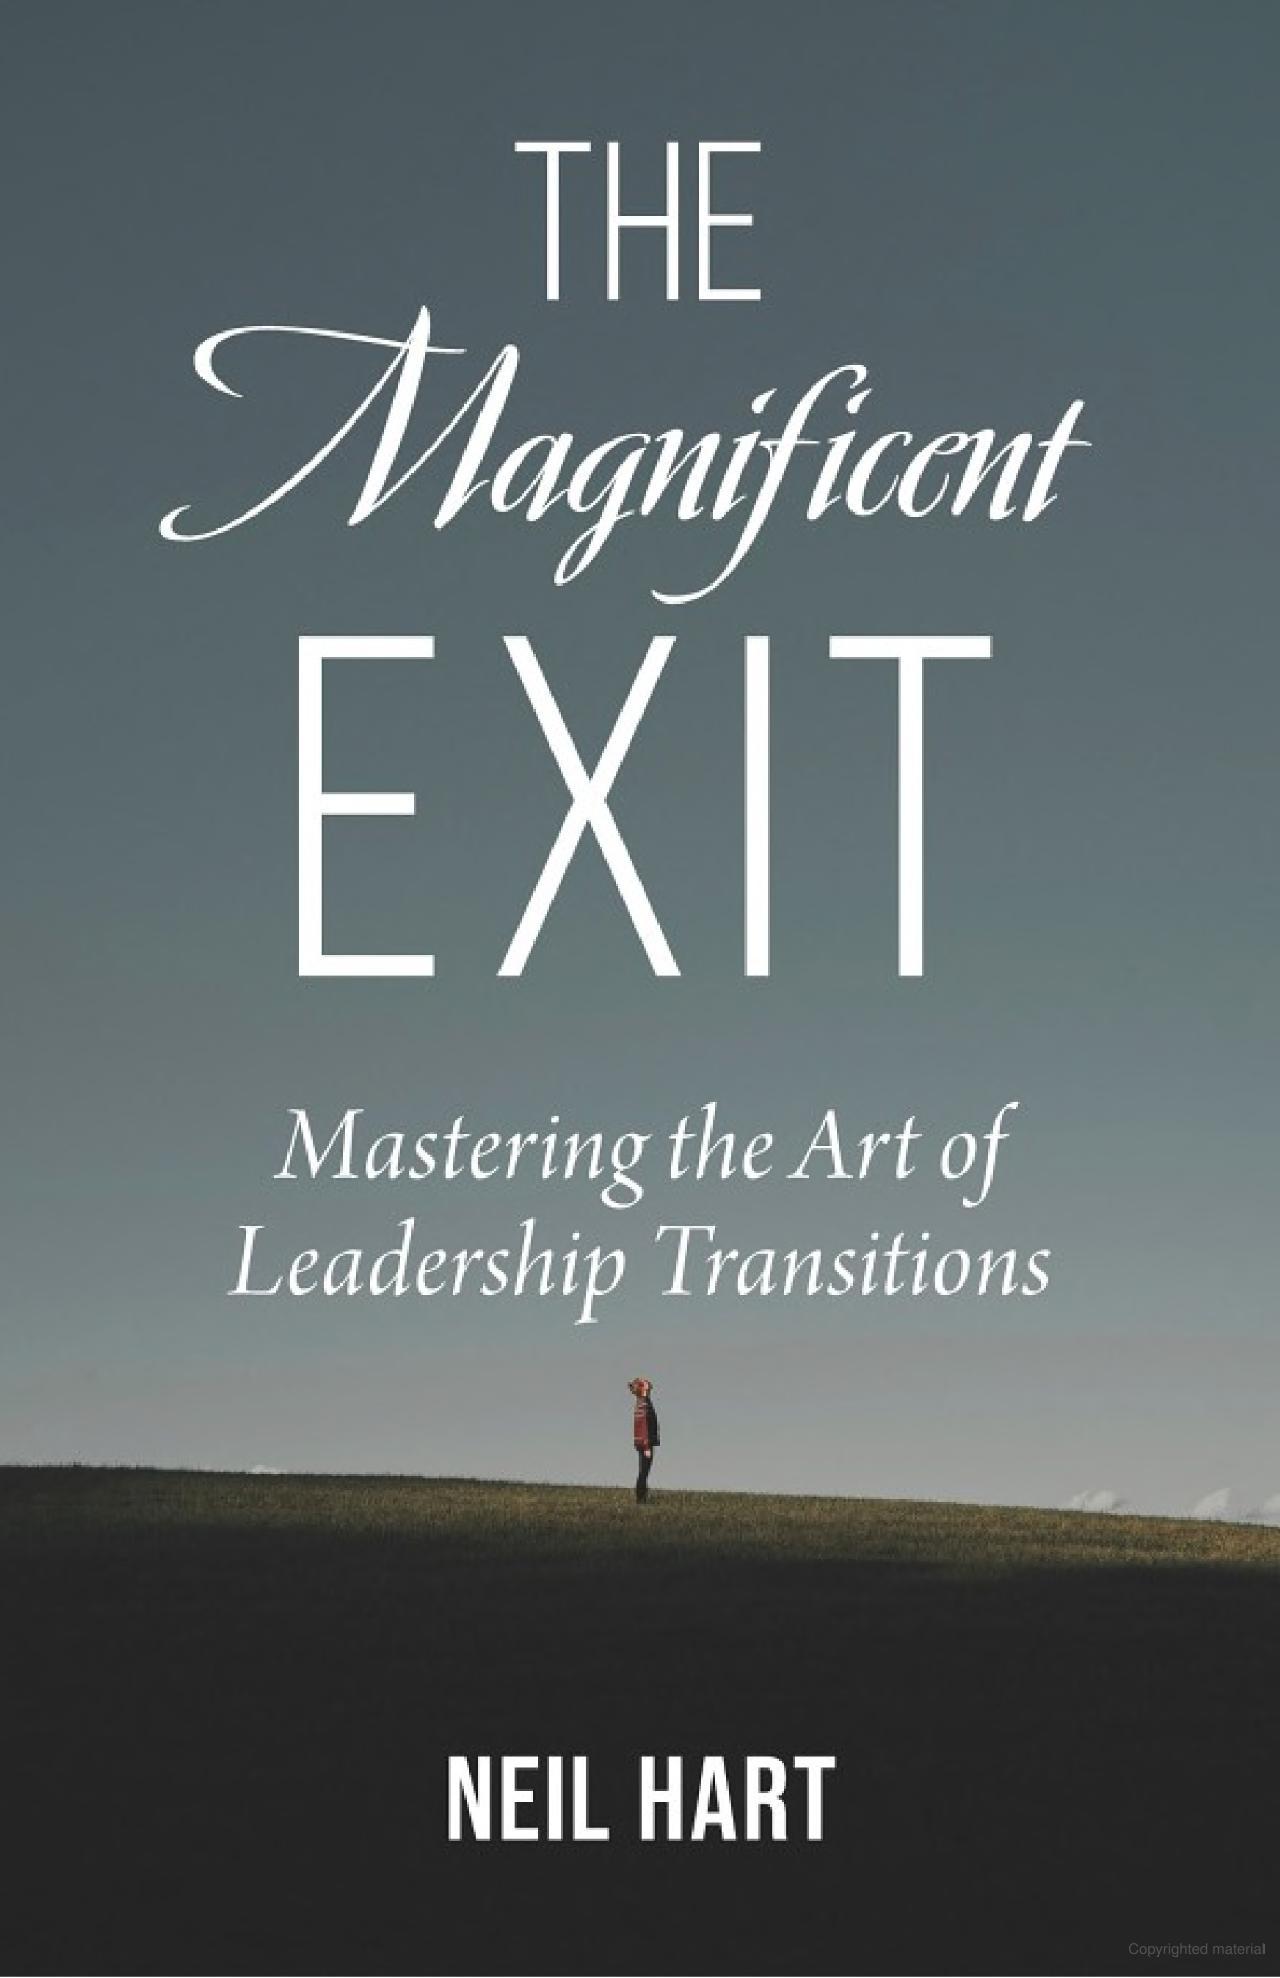 Book Cover of the Magnificent Exit showing a landscape with a person standing on it